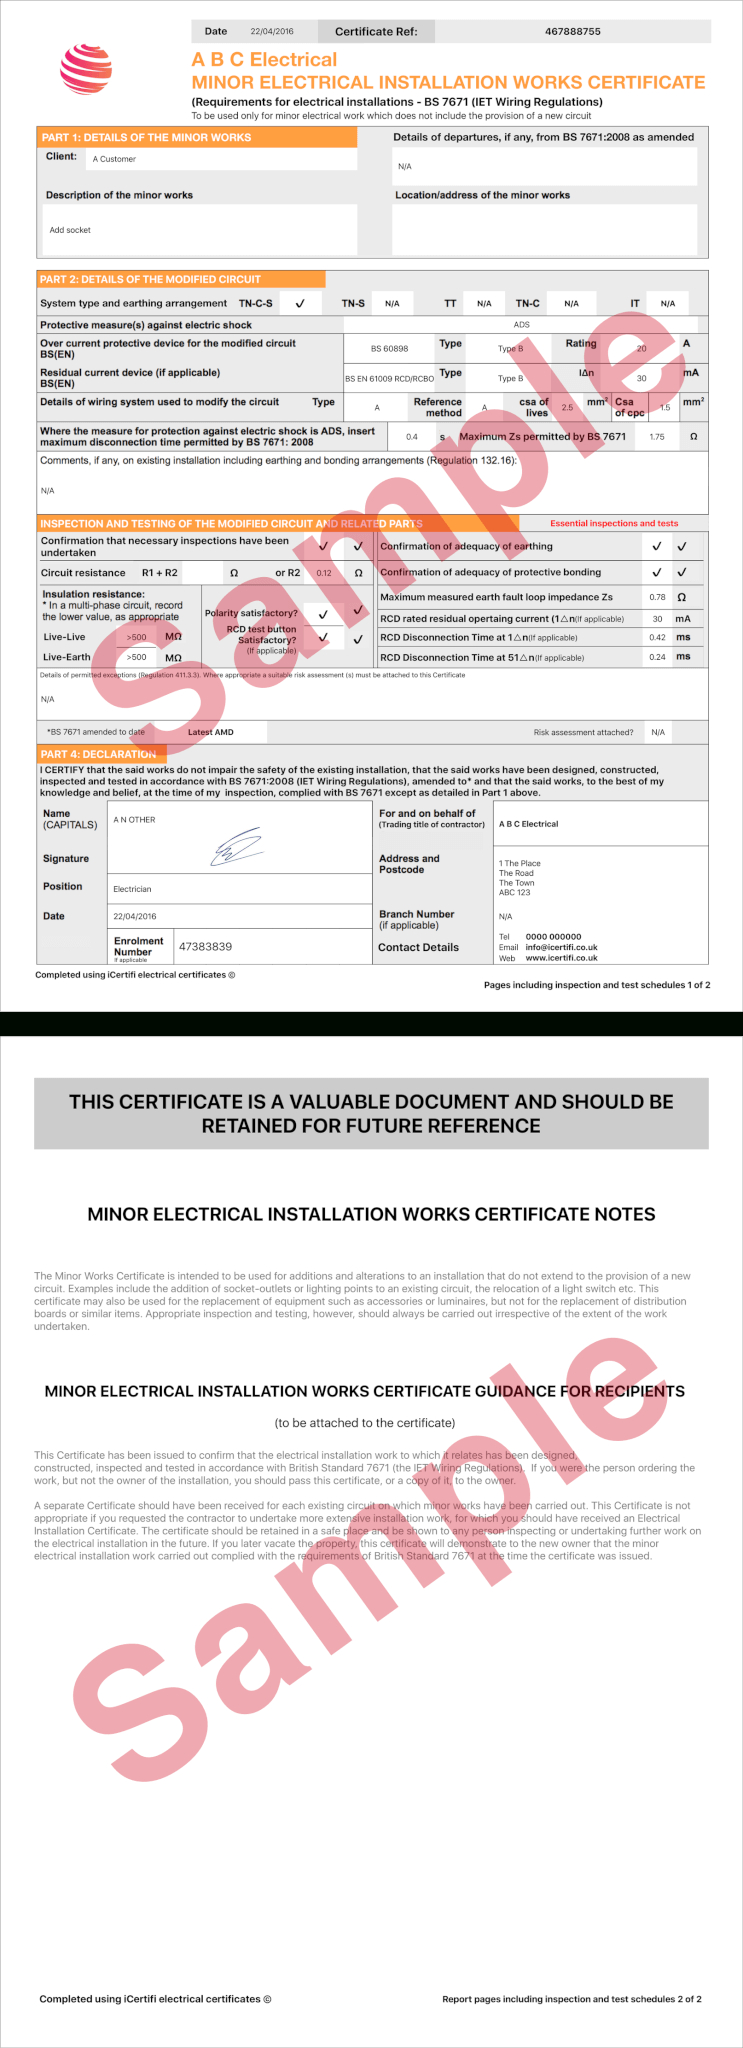 Electrical Certificate - Example Minor Works Certificate Regarding Electrical Minor Works Certificate Template